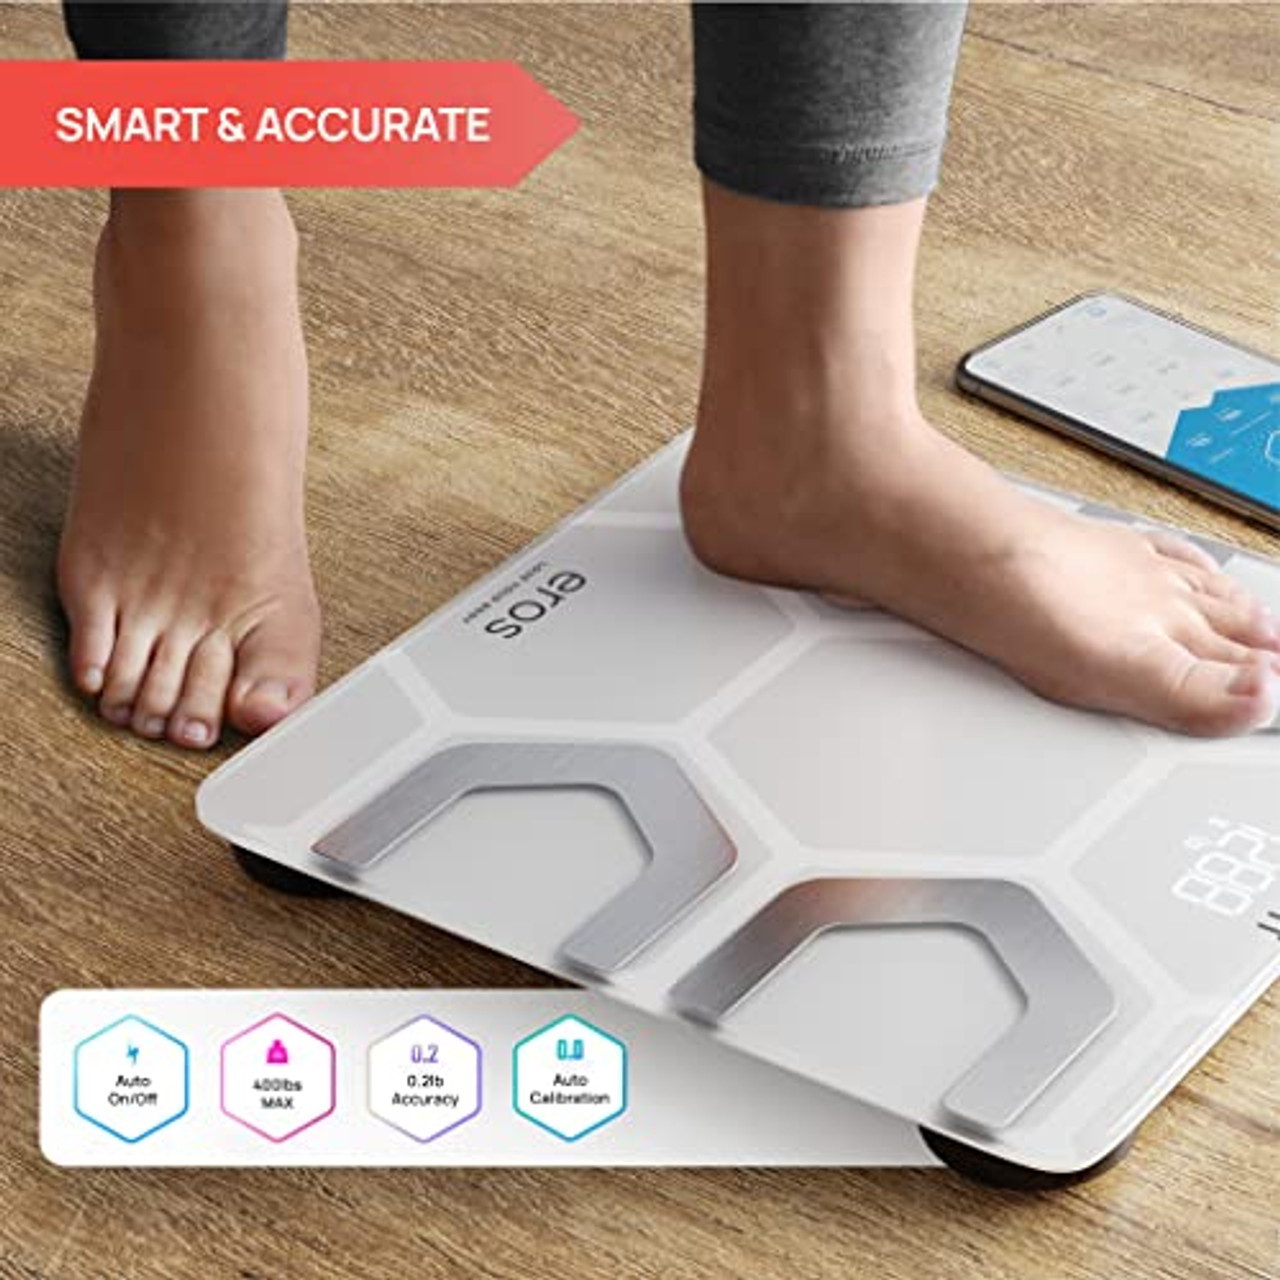 INEVIFIT Eros Bluetooth Body Fat Scale Smart BMI Highly Accurate Digital Bathroom Body Composition Analyzer with Wireless Smartp